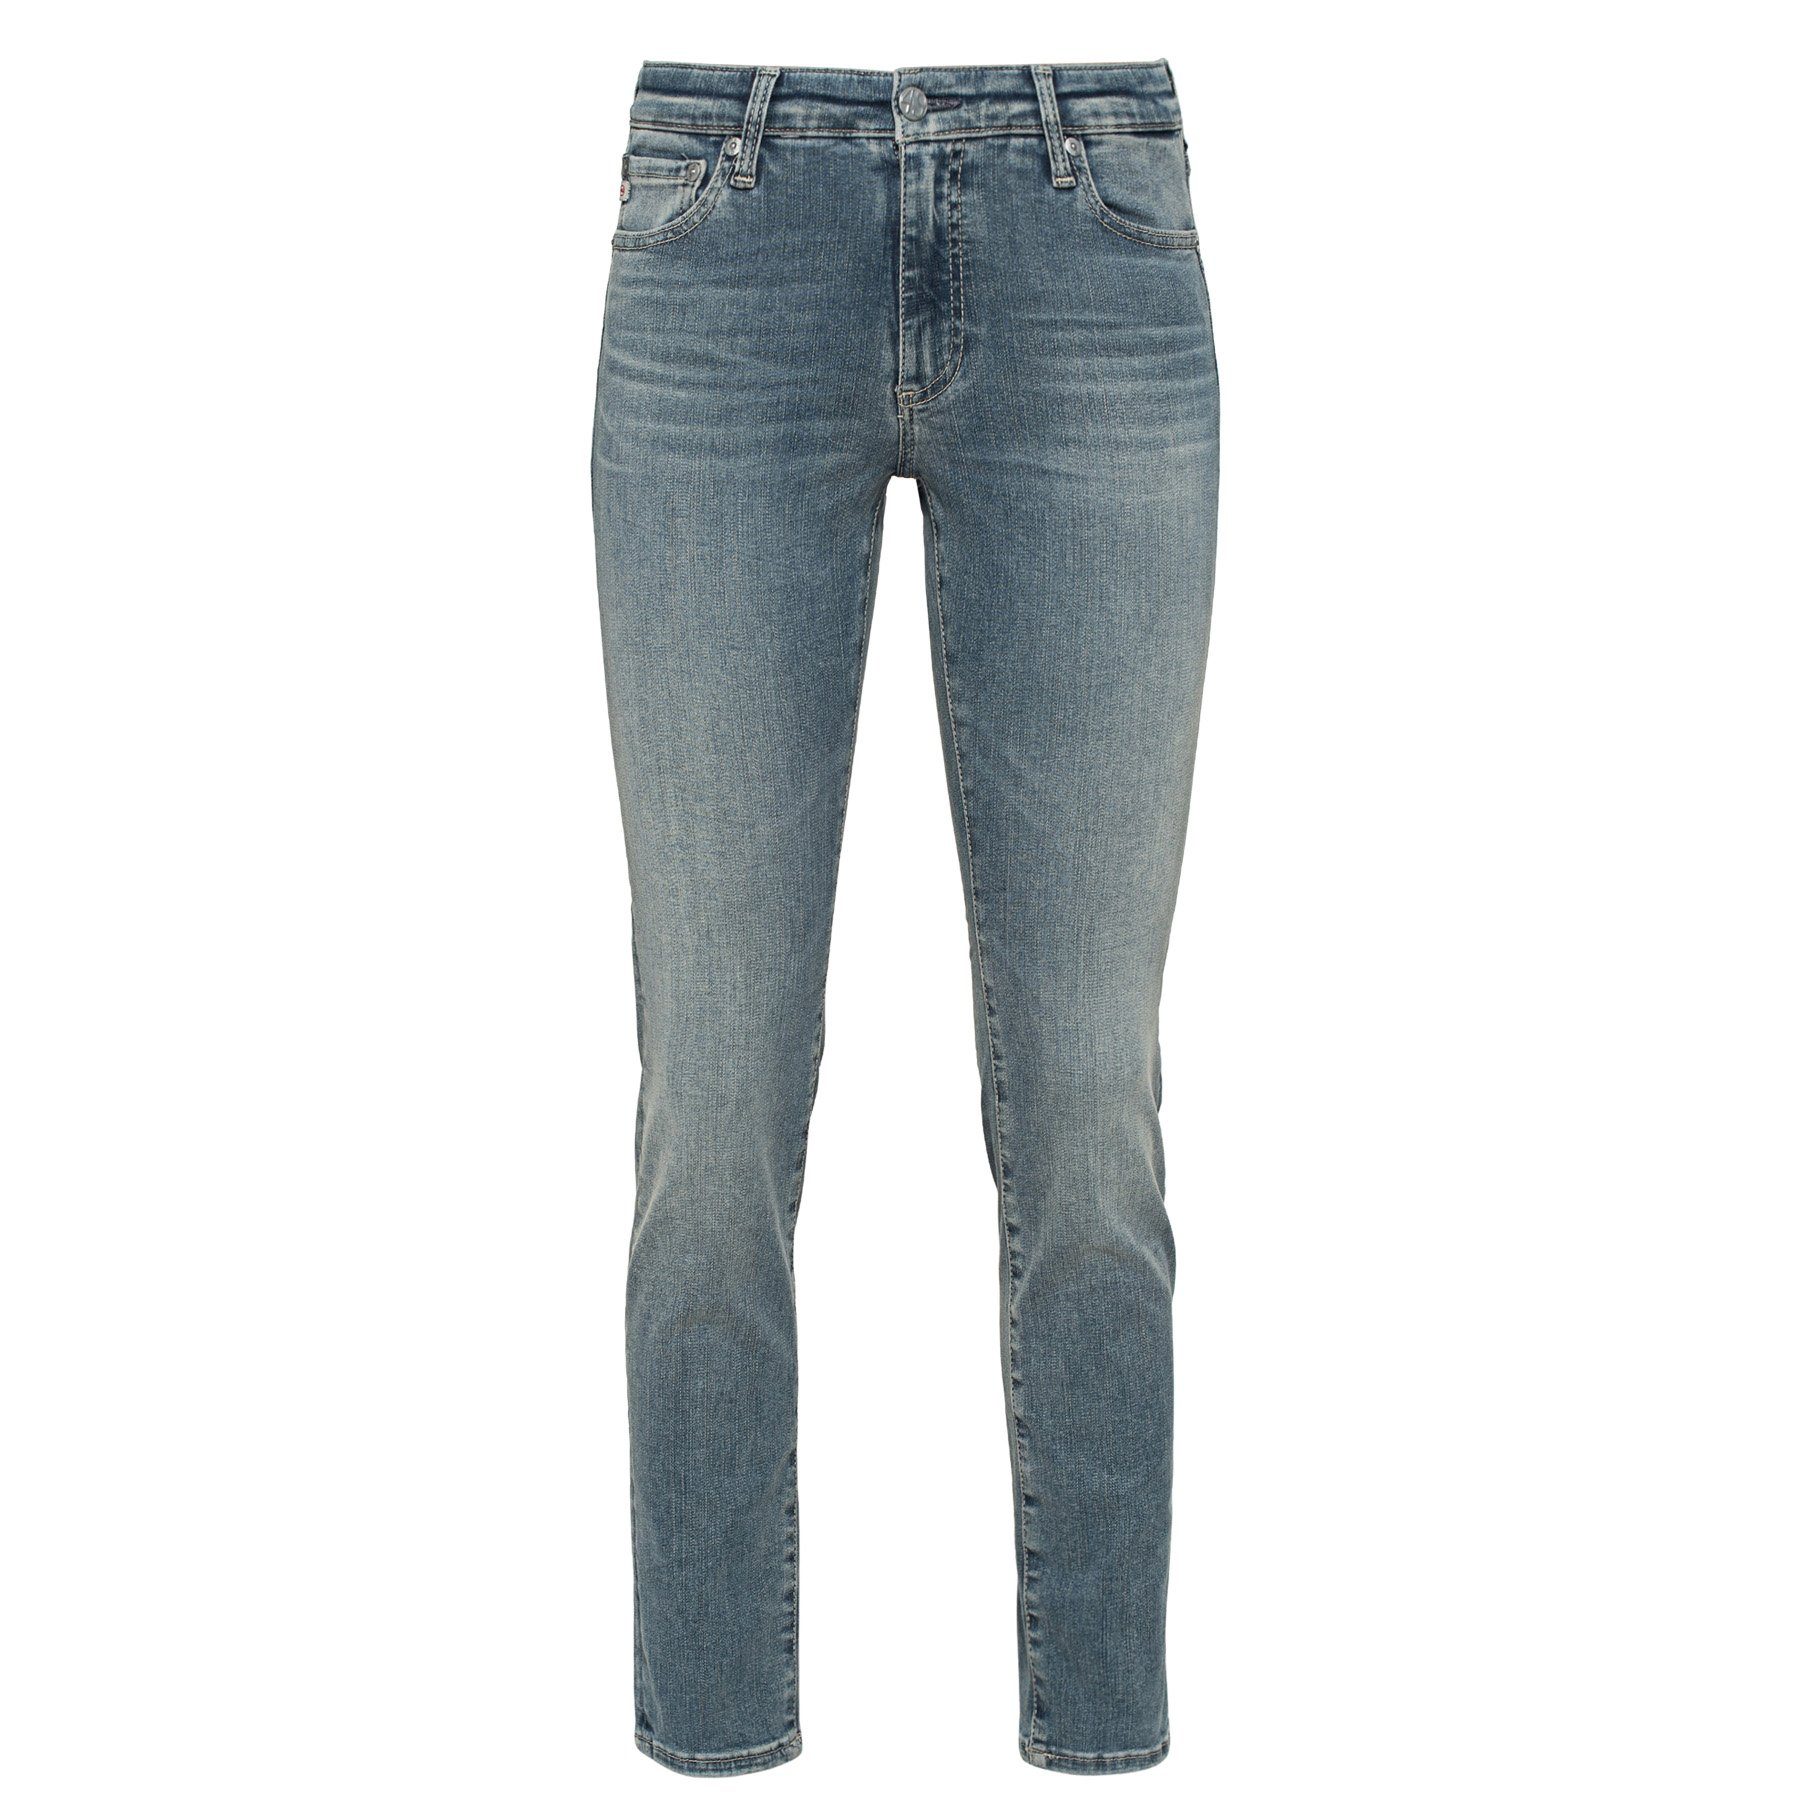 ADRIANO GOLDSCHMIED Low-rise-Jeans Jeans PRIMA Ankle Cigarette